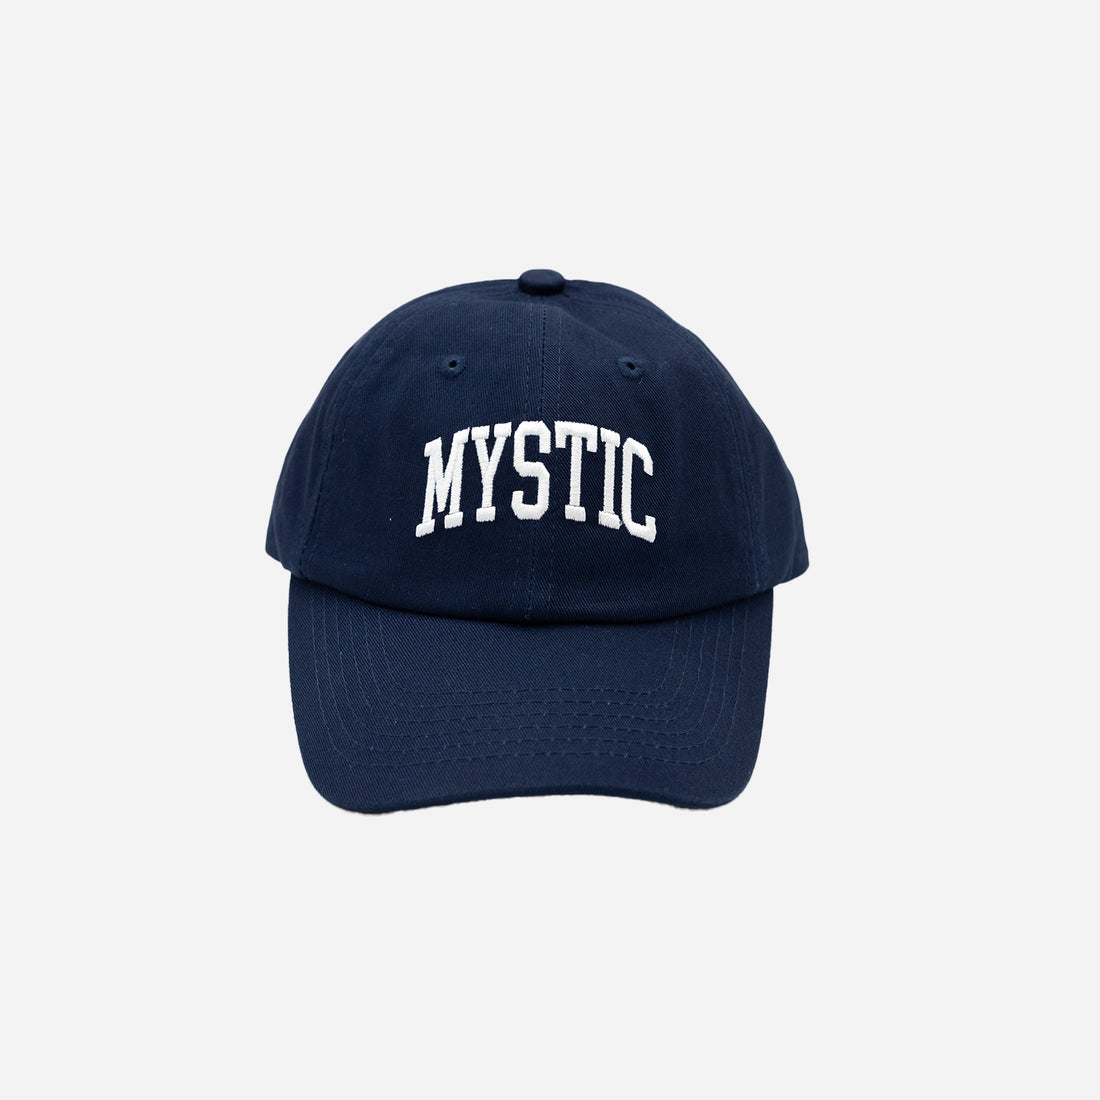 Youth & Kids Apparel Mystic Just from – Just Mystic Brand